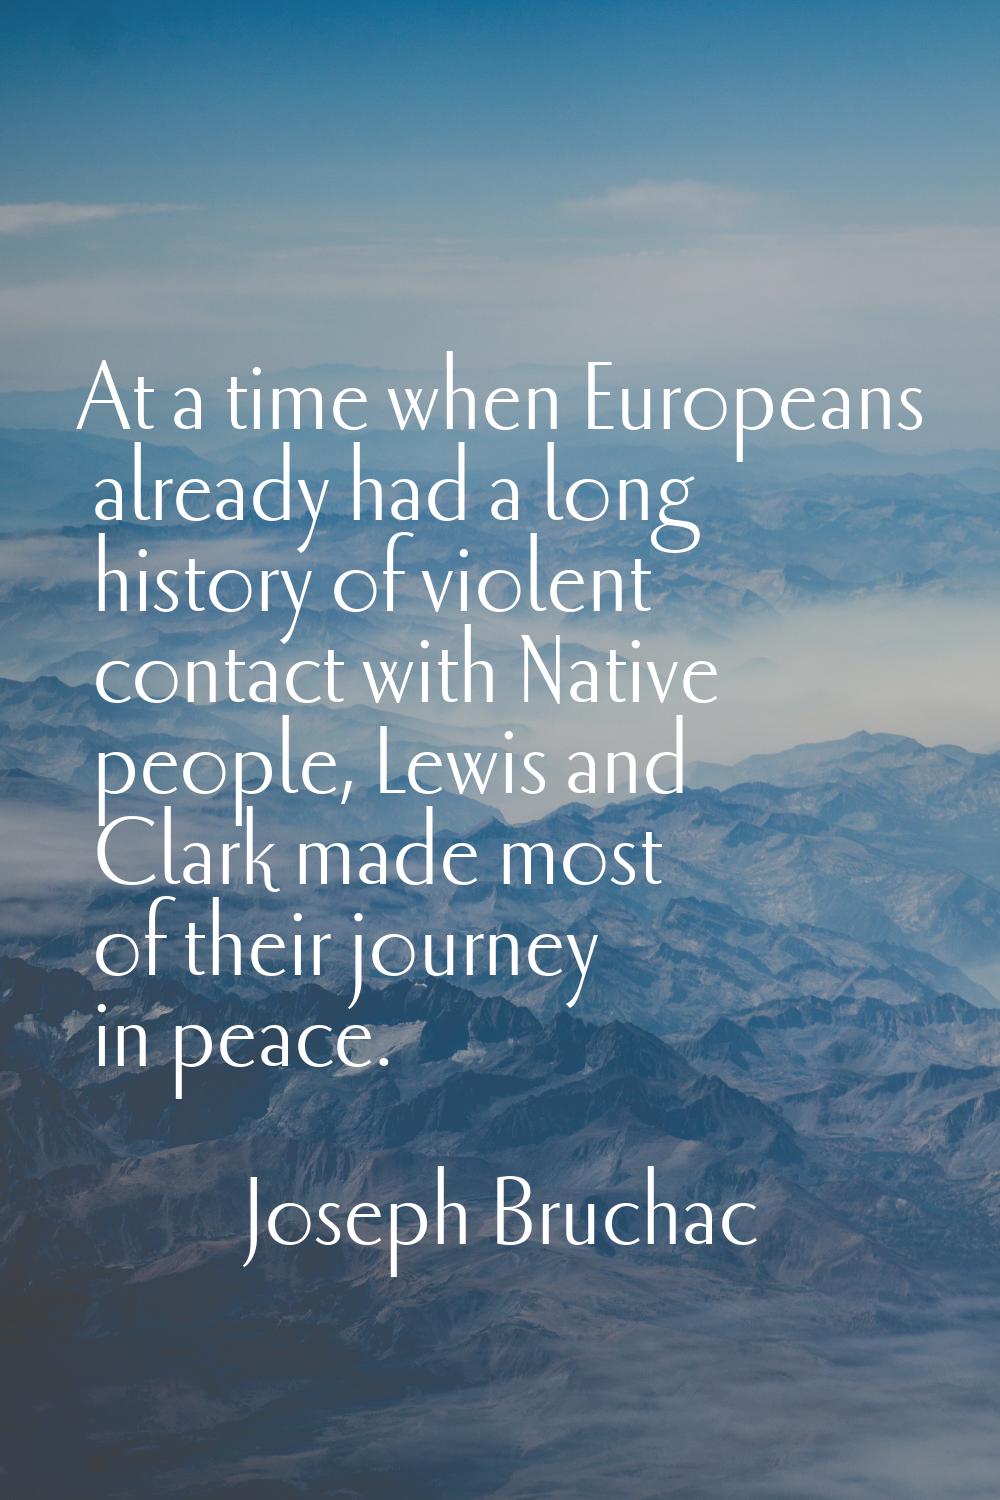 At a time when Europeans already had a long history of violent contact with Native people, Lewis an